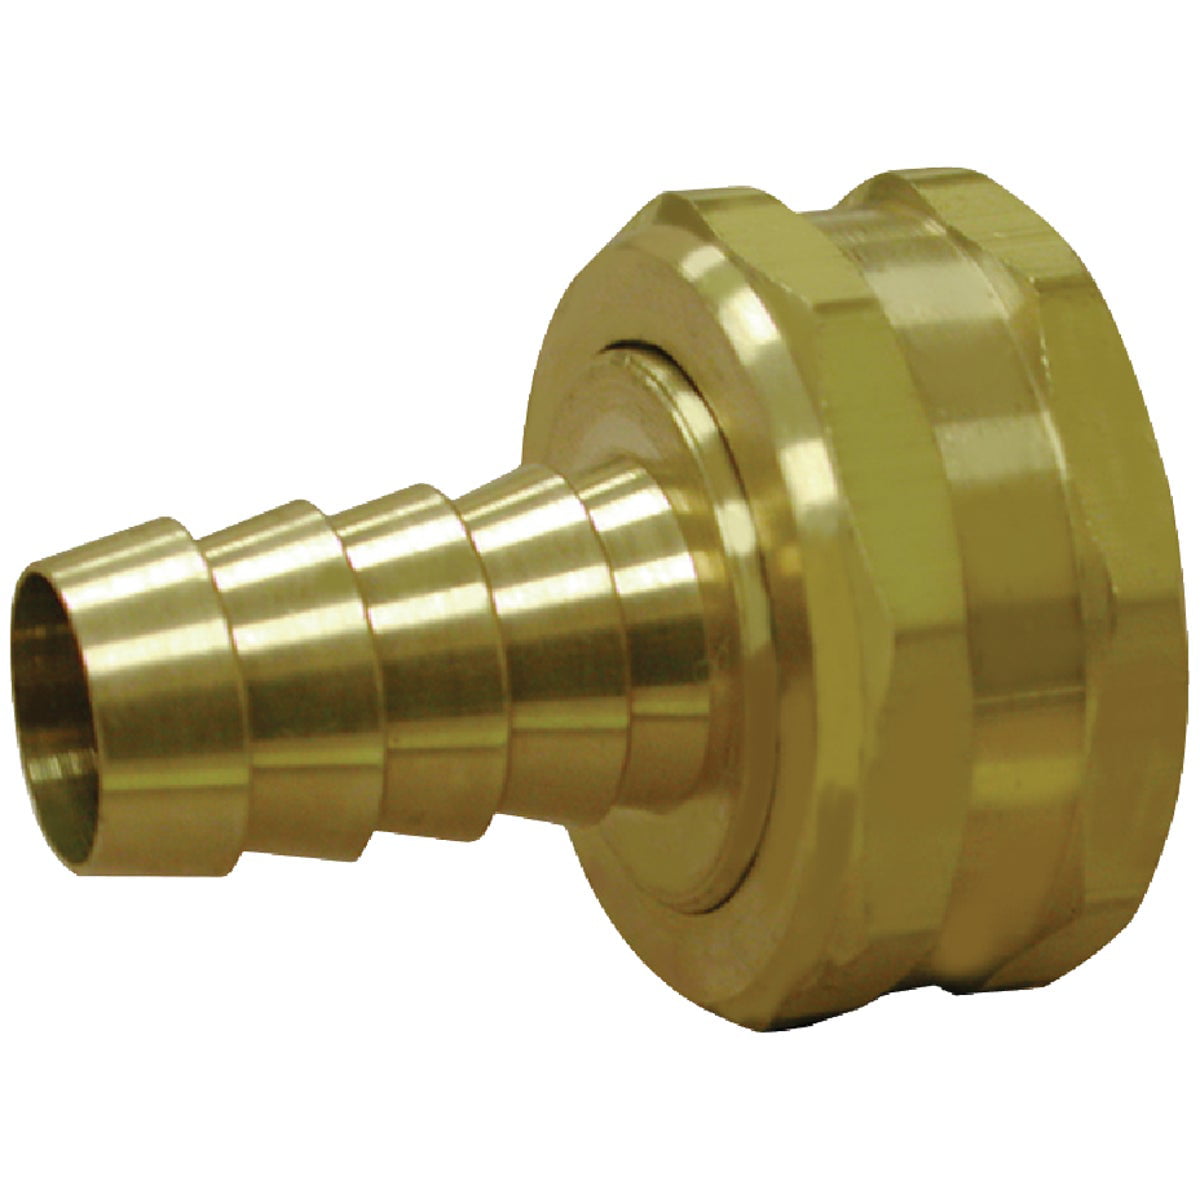 3/4 Barb x 3/4 Male Pipe Connector Anderson Metals Brass Push-On Swivel Hose Fitting 